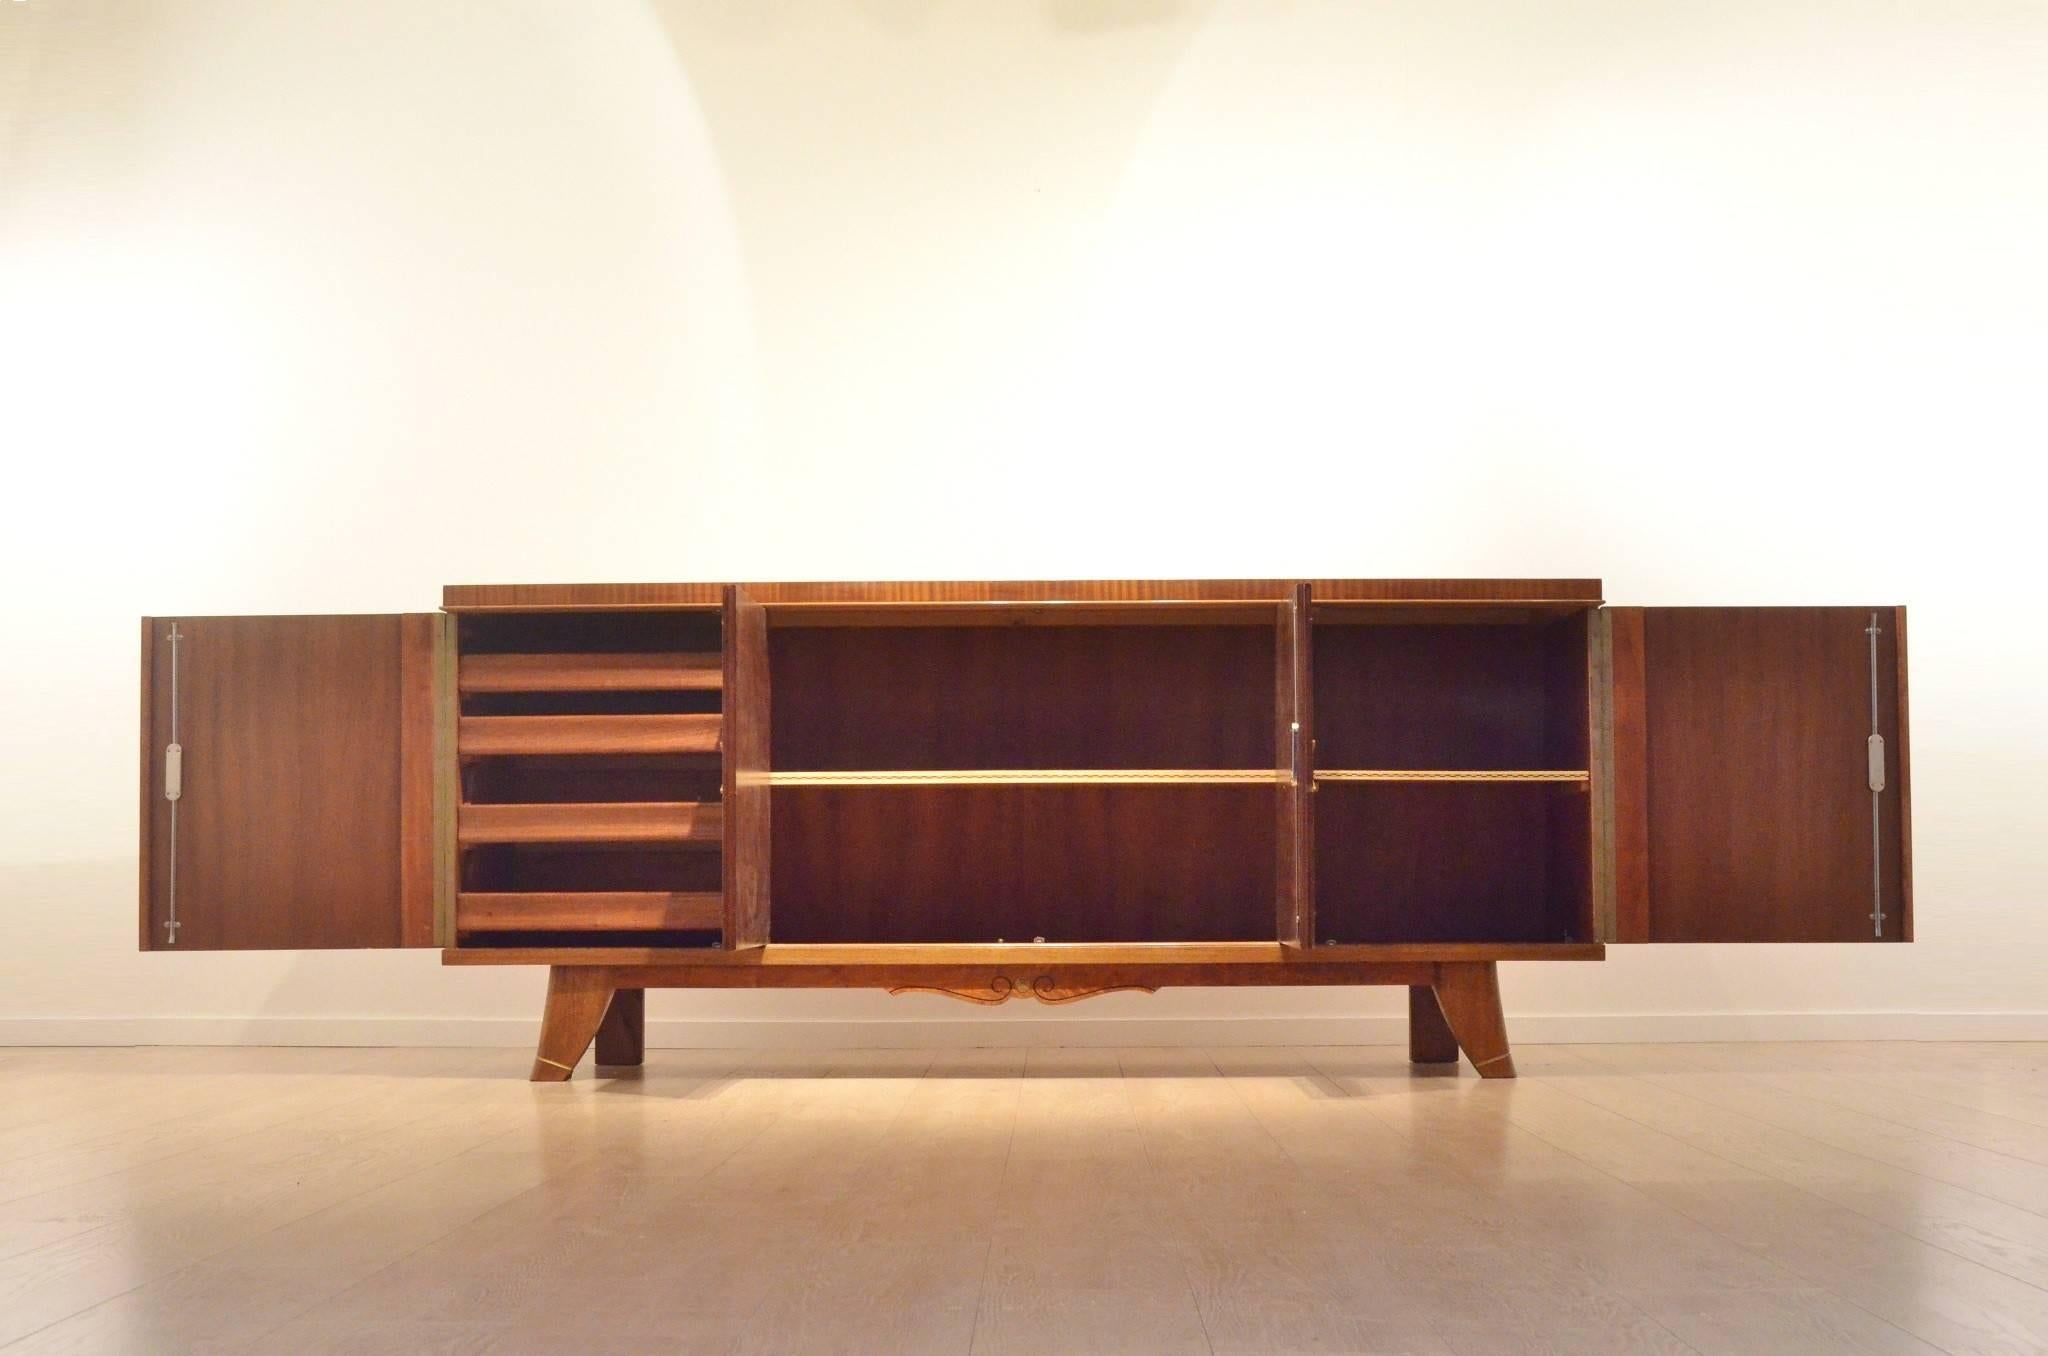 Extra large sized Mid-Century sideboard from De Coene - outstanding crafting quality with a neoclassic style design. Mahogany and walnut veneered corpus / brass inserts.